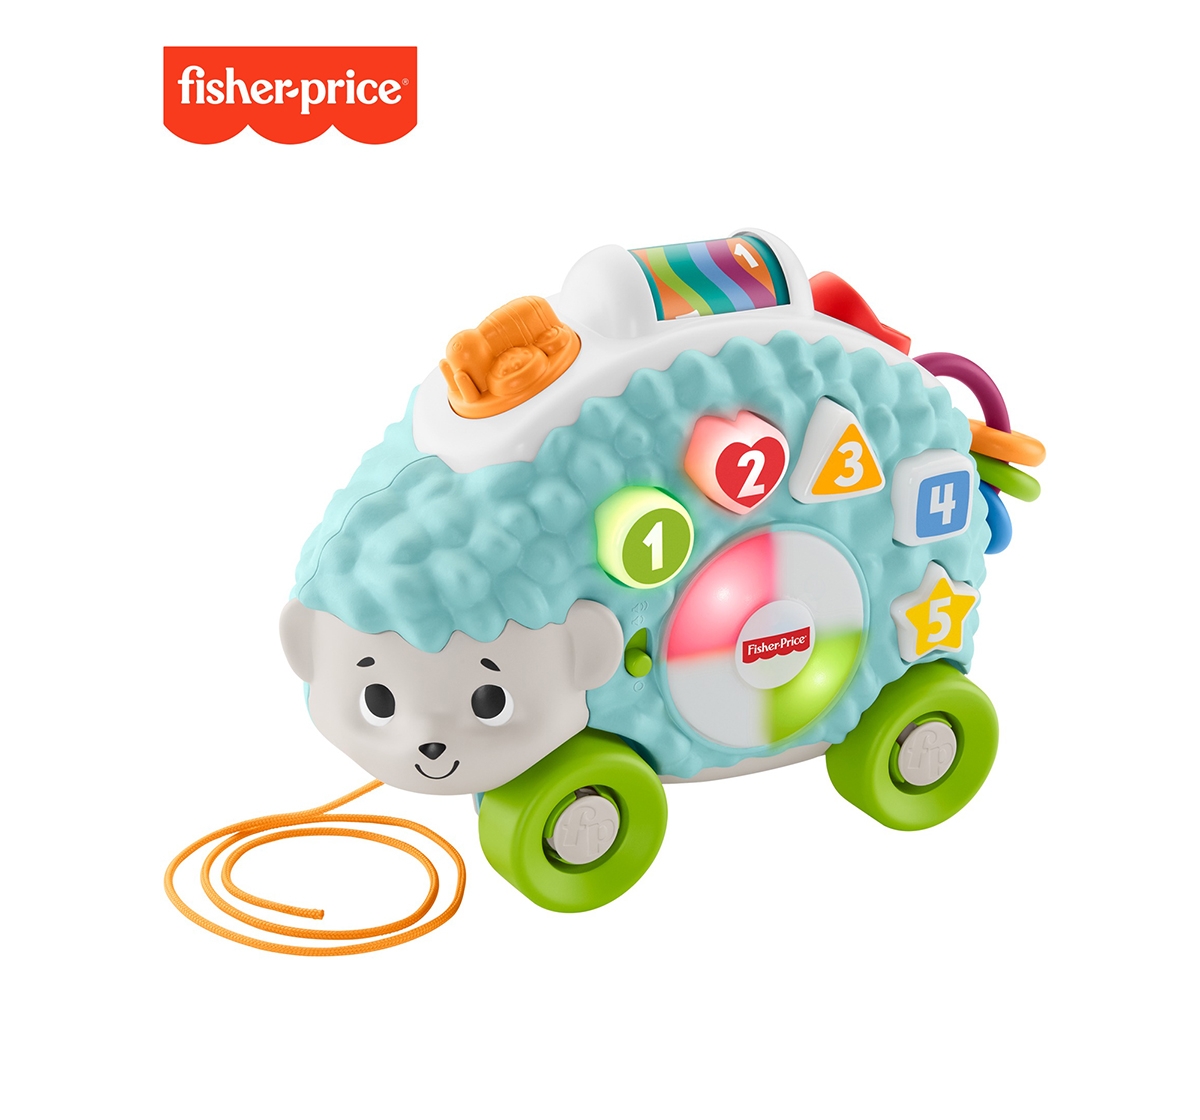 Fisher-Price | Fisher-Price Linkimals Happy Shapes Hedgehog, Learning Toys for Kids age 9M+ 